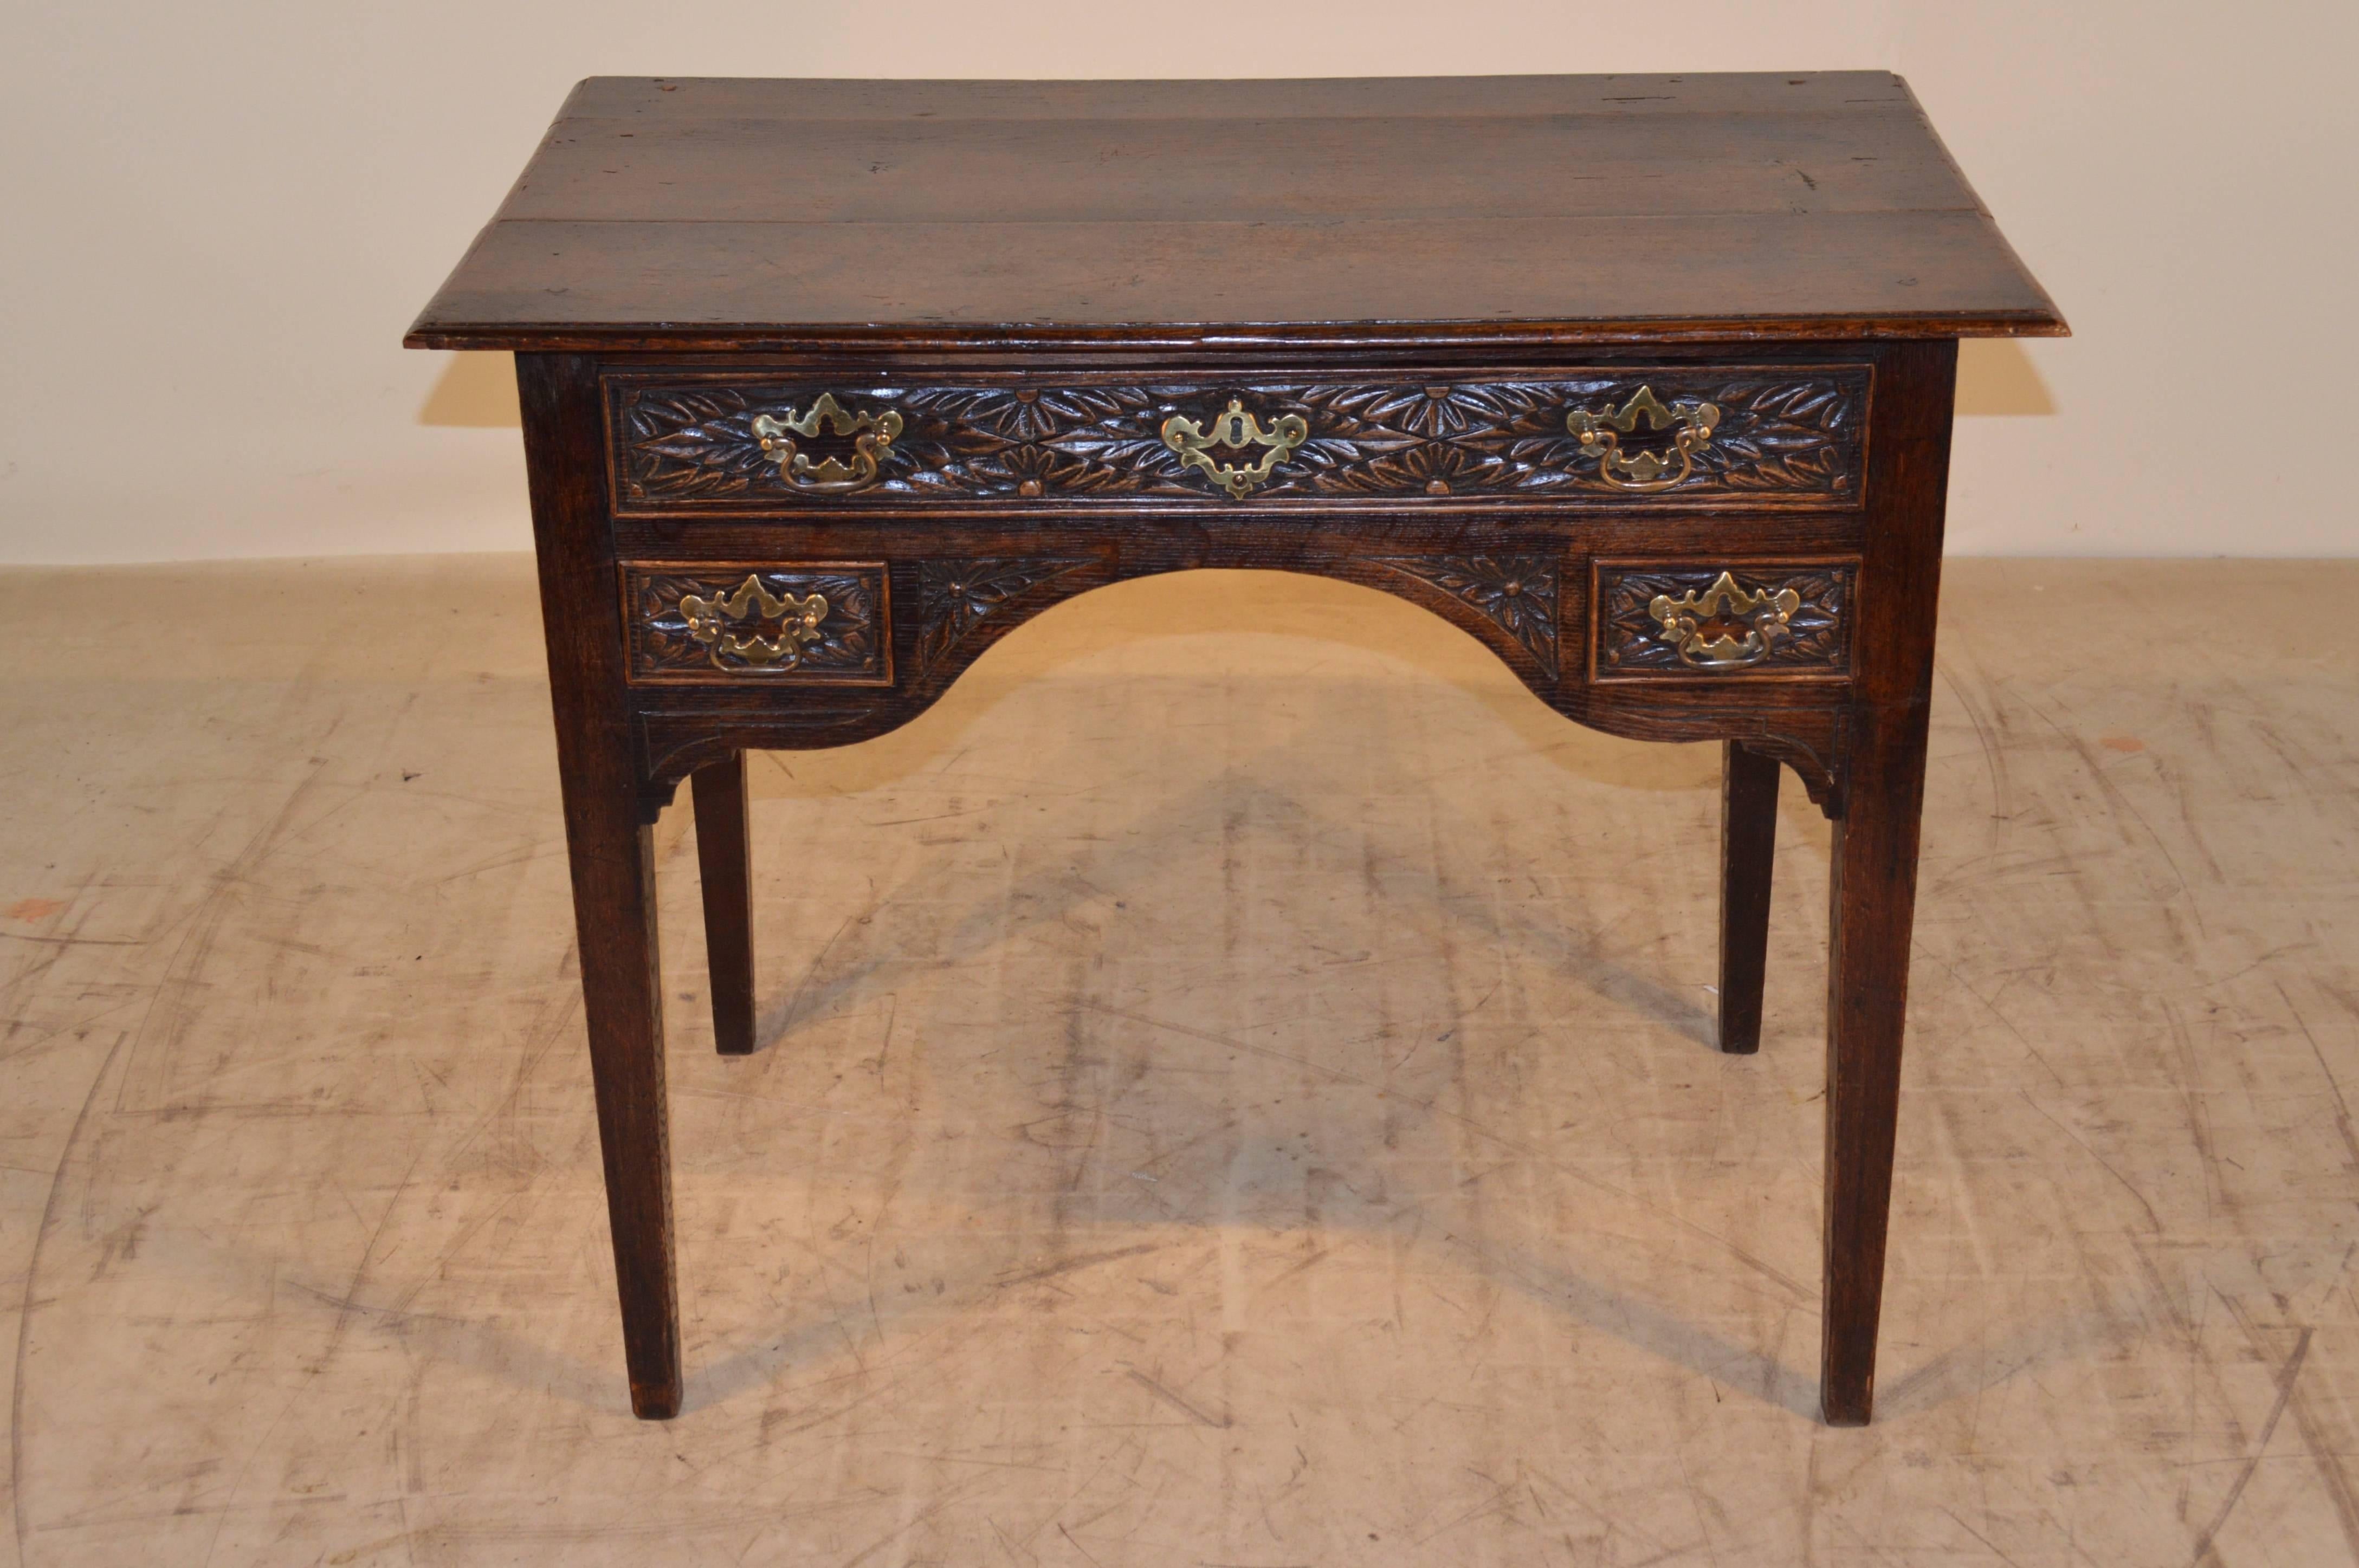 18th Century English oak lowboy with a plank top which has a beveled edge. The case has a shaped apron with three drawers in the front, all with carved decoration. The piece is supported on hand tapered legs. There is a slight nibble on the front